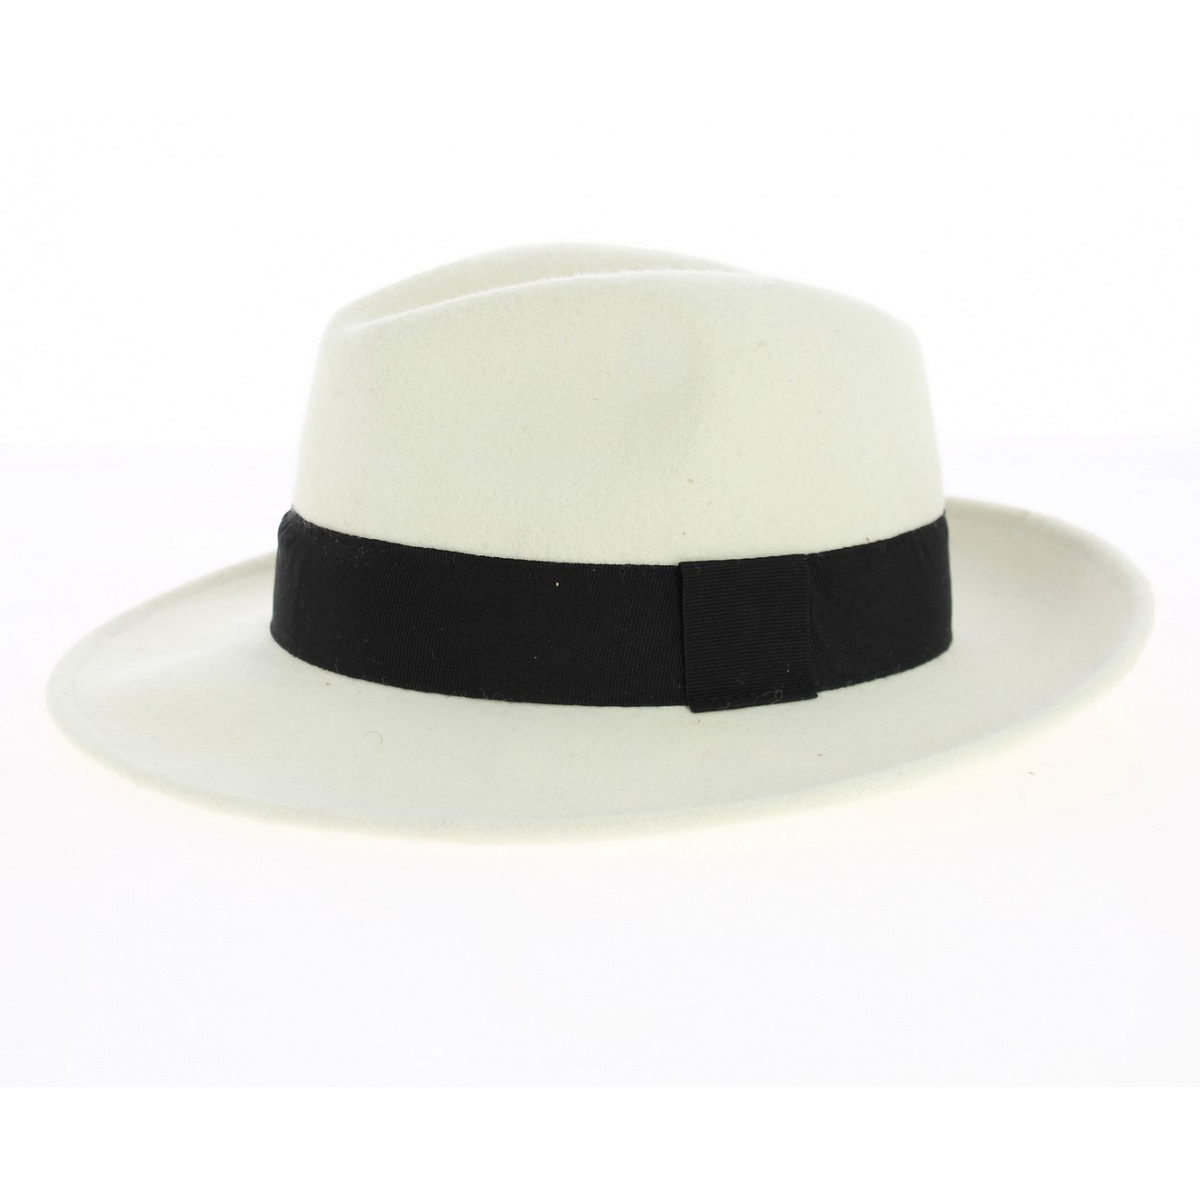 Fedora Hat Wool Felt White/Black Water Resistant Reference : 9428